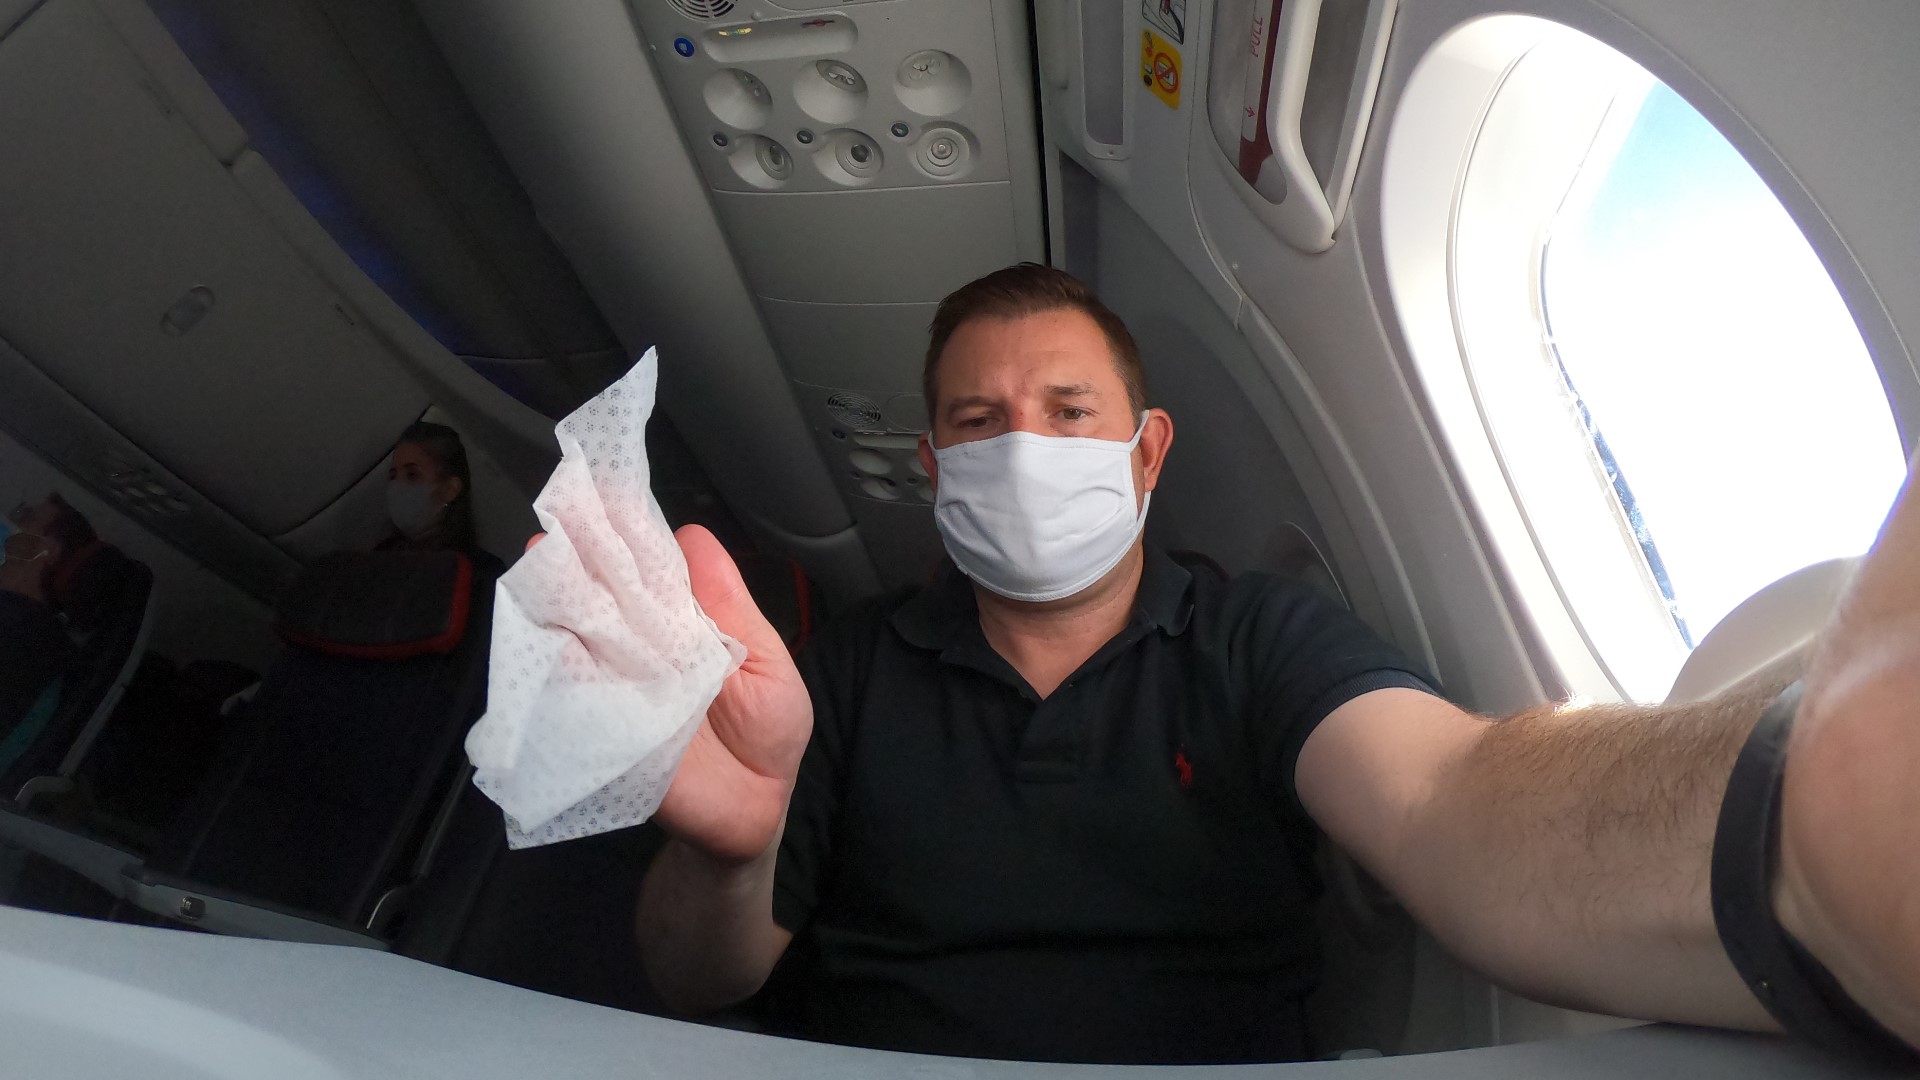 10 Tampa Bay’s Beau Zimmer went on a special assignment at 30,000 feet to show what it's like to fly during the coronavirus pandemic.